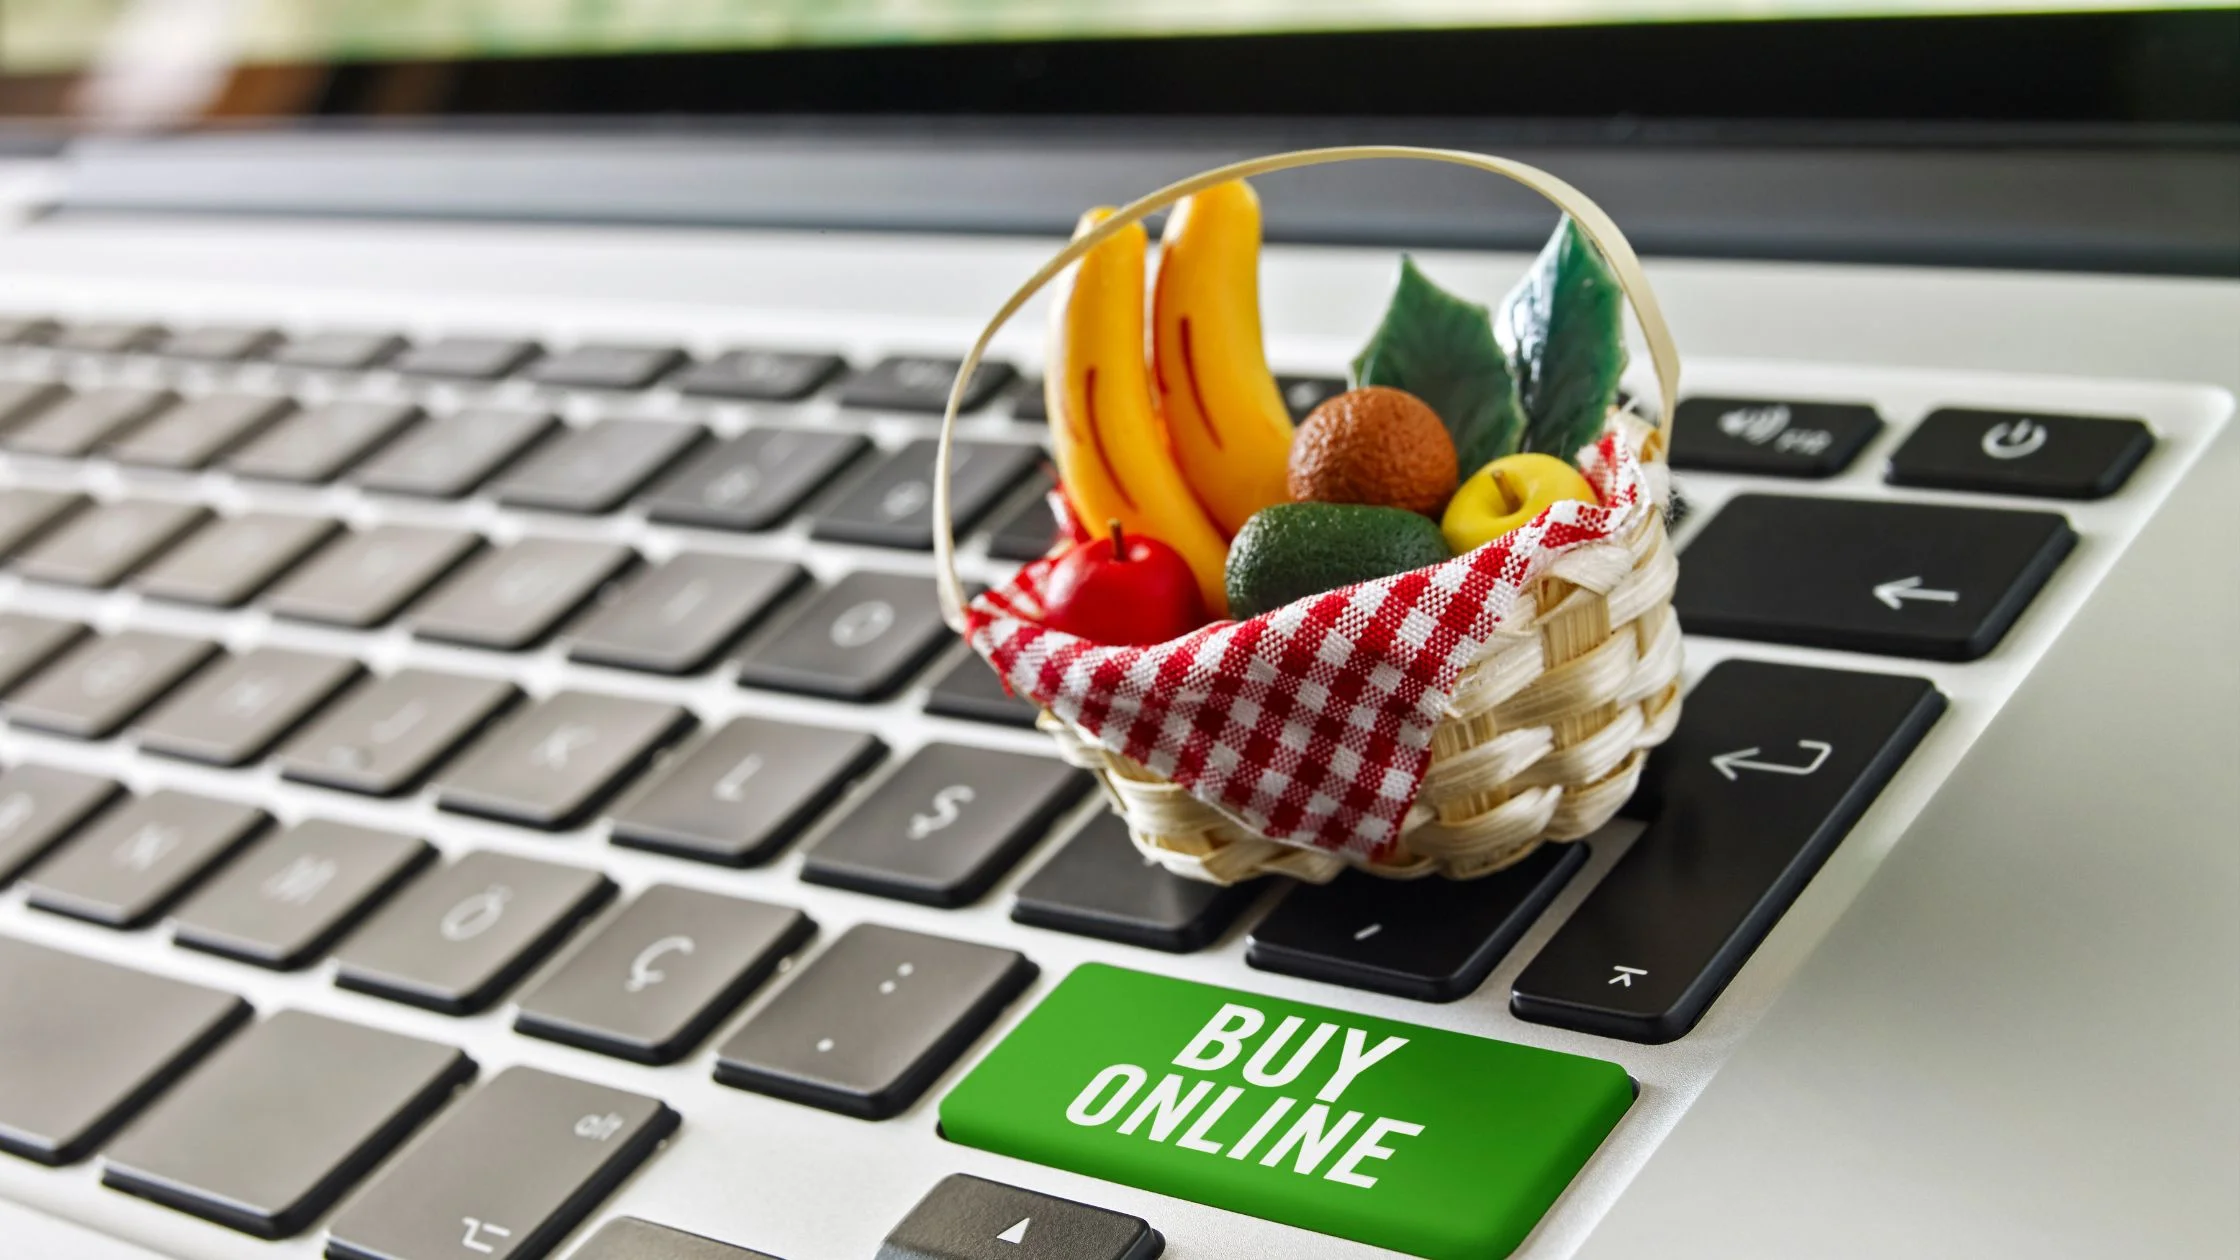 The ultimate online fruit experience: our expertise in freshness and quality